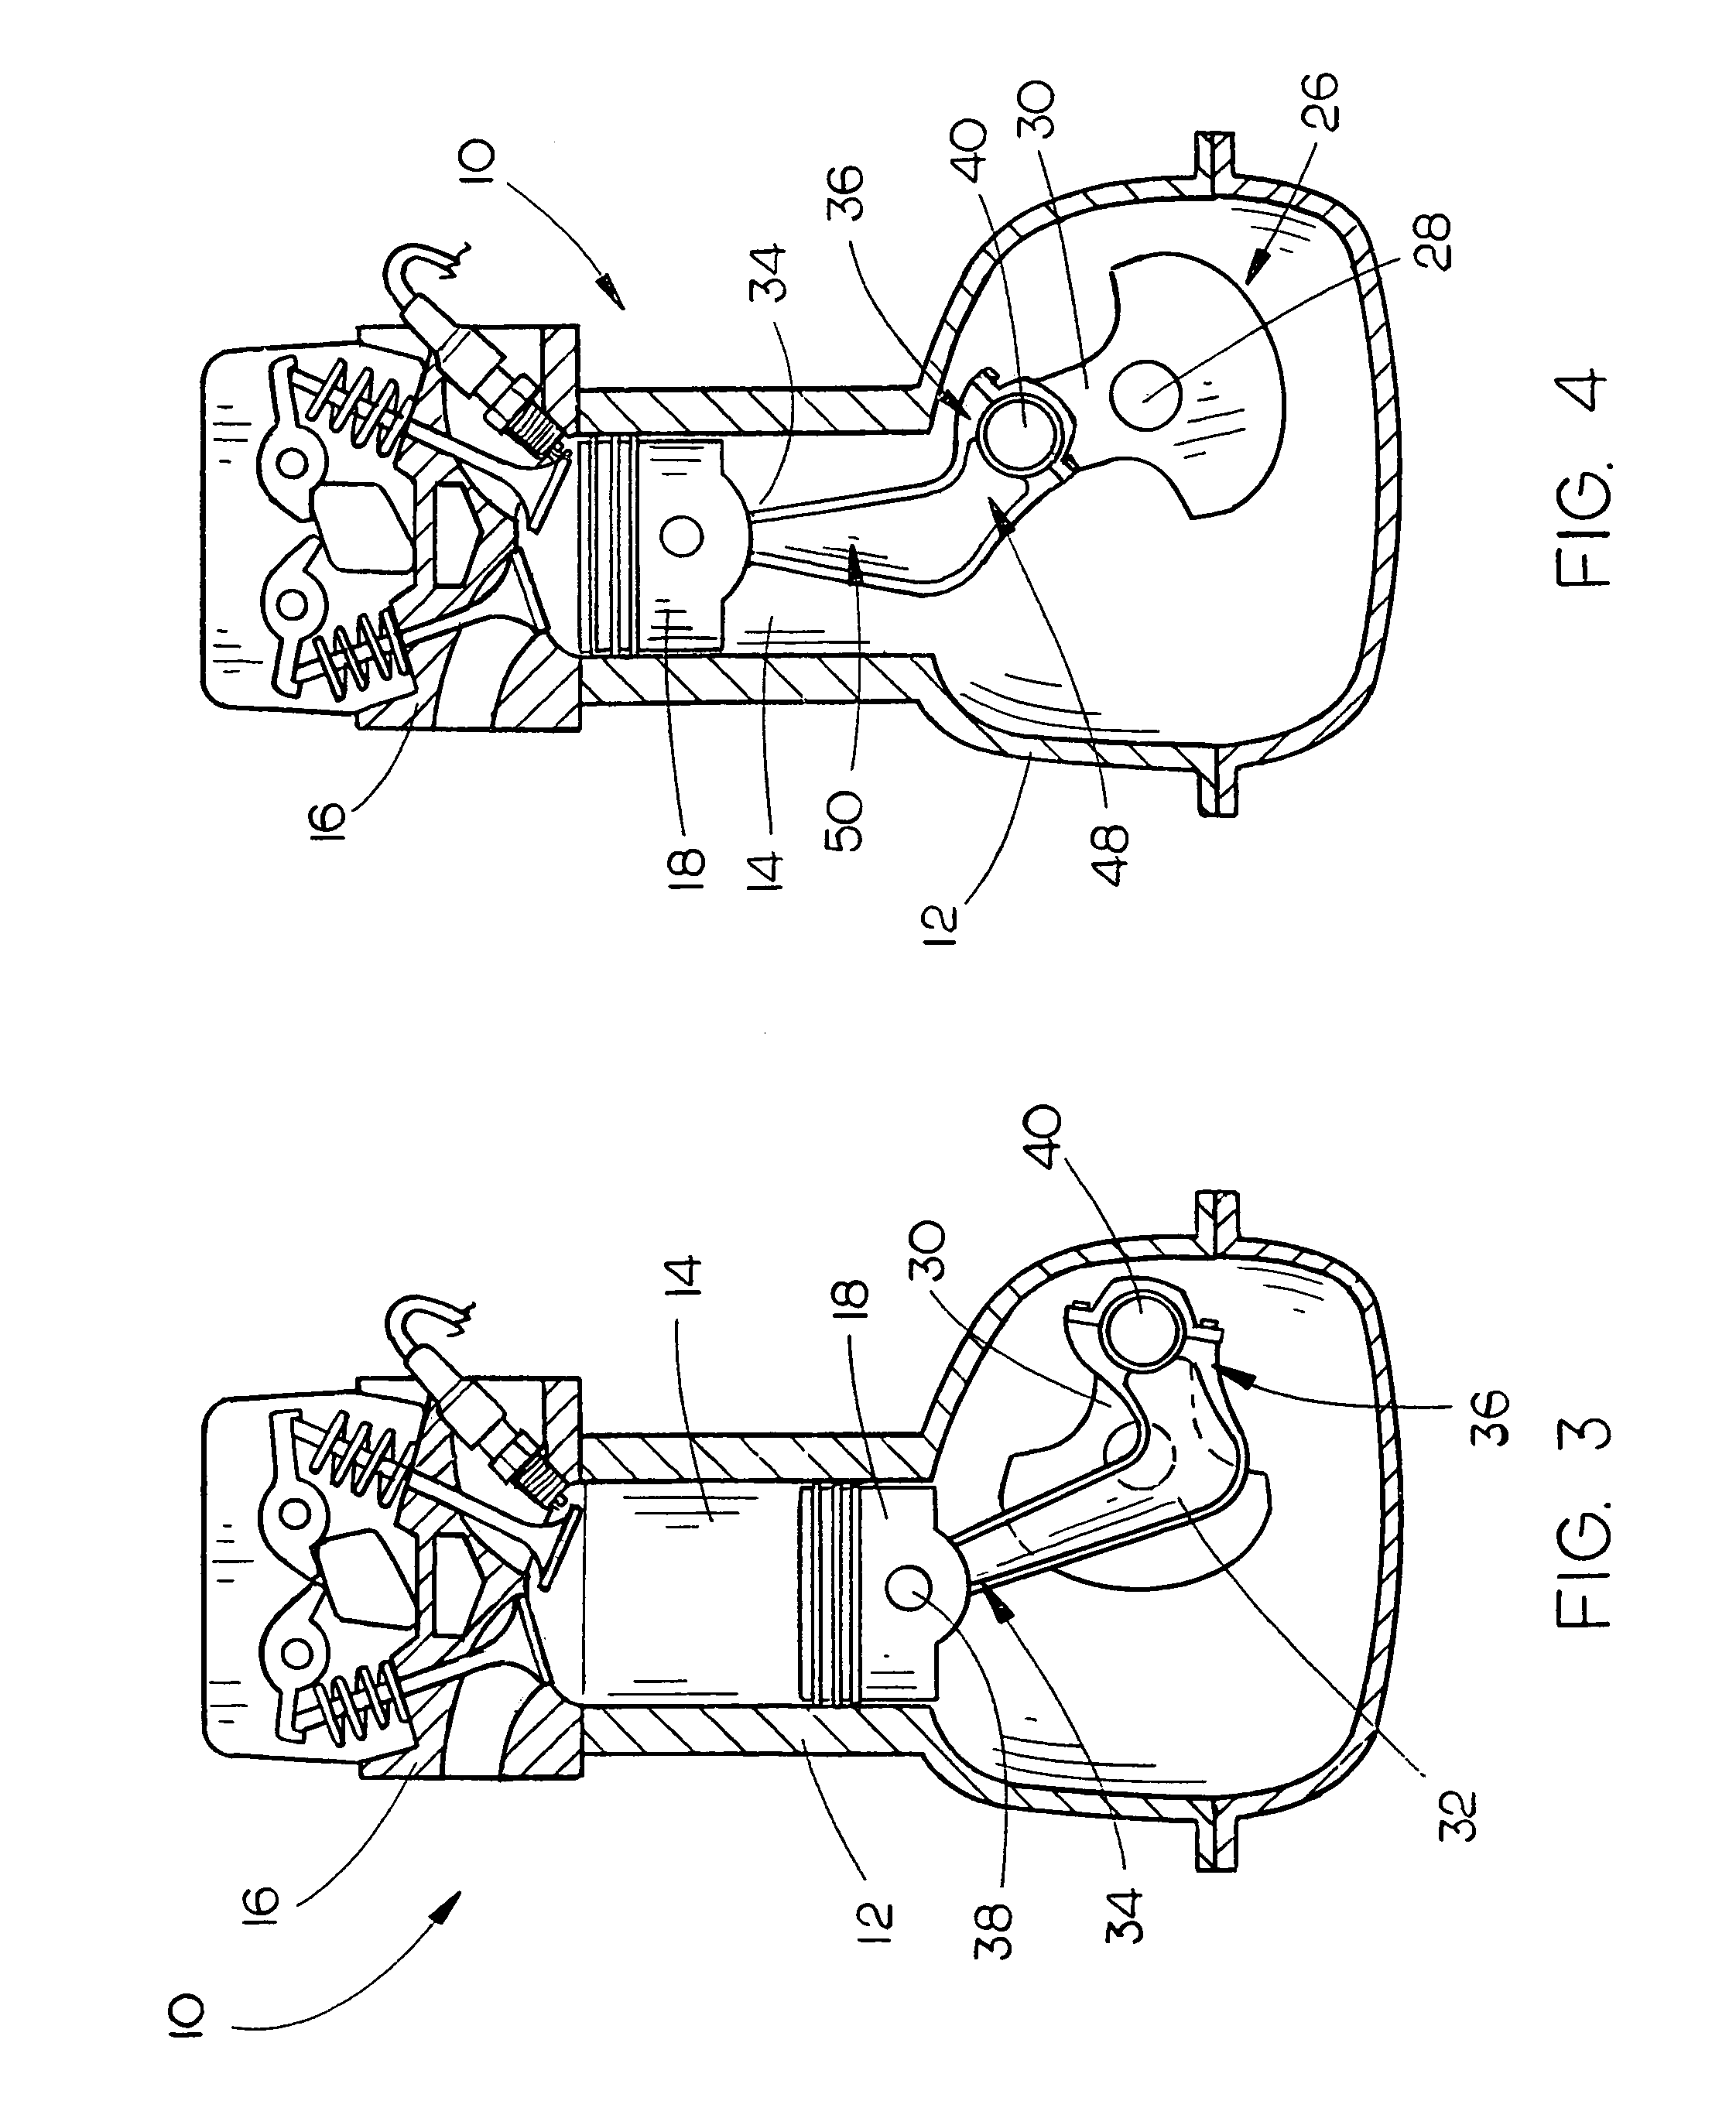 Connecting rod and crankshaft assembly for an engine